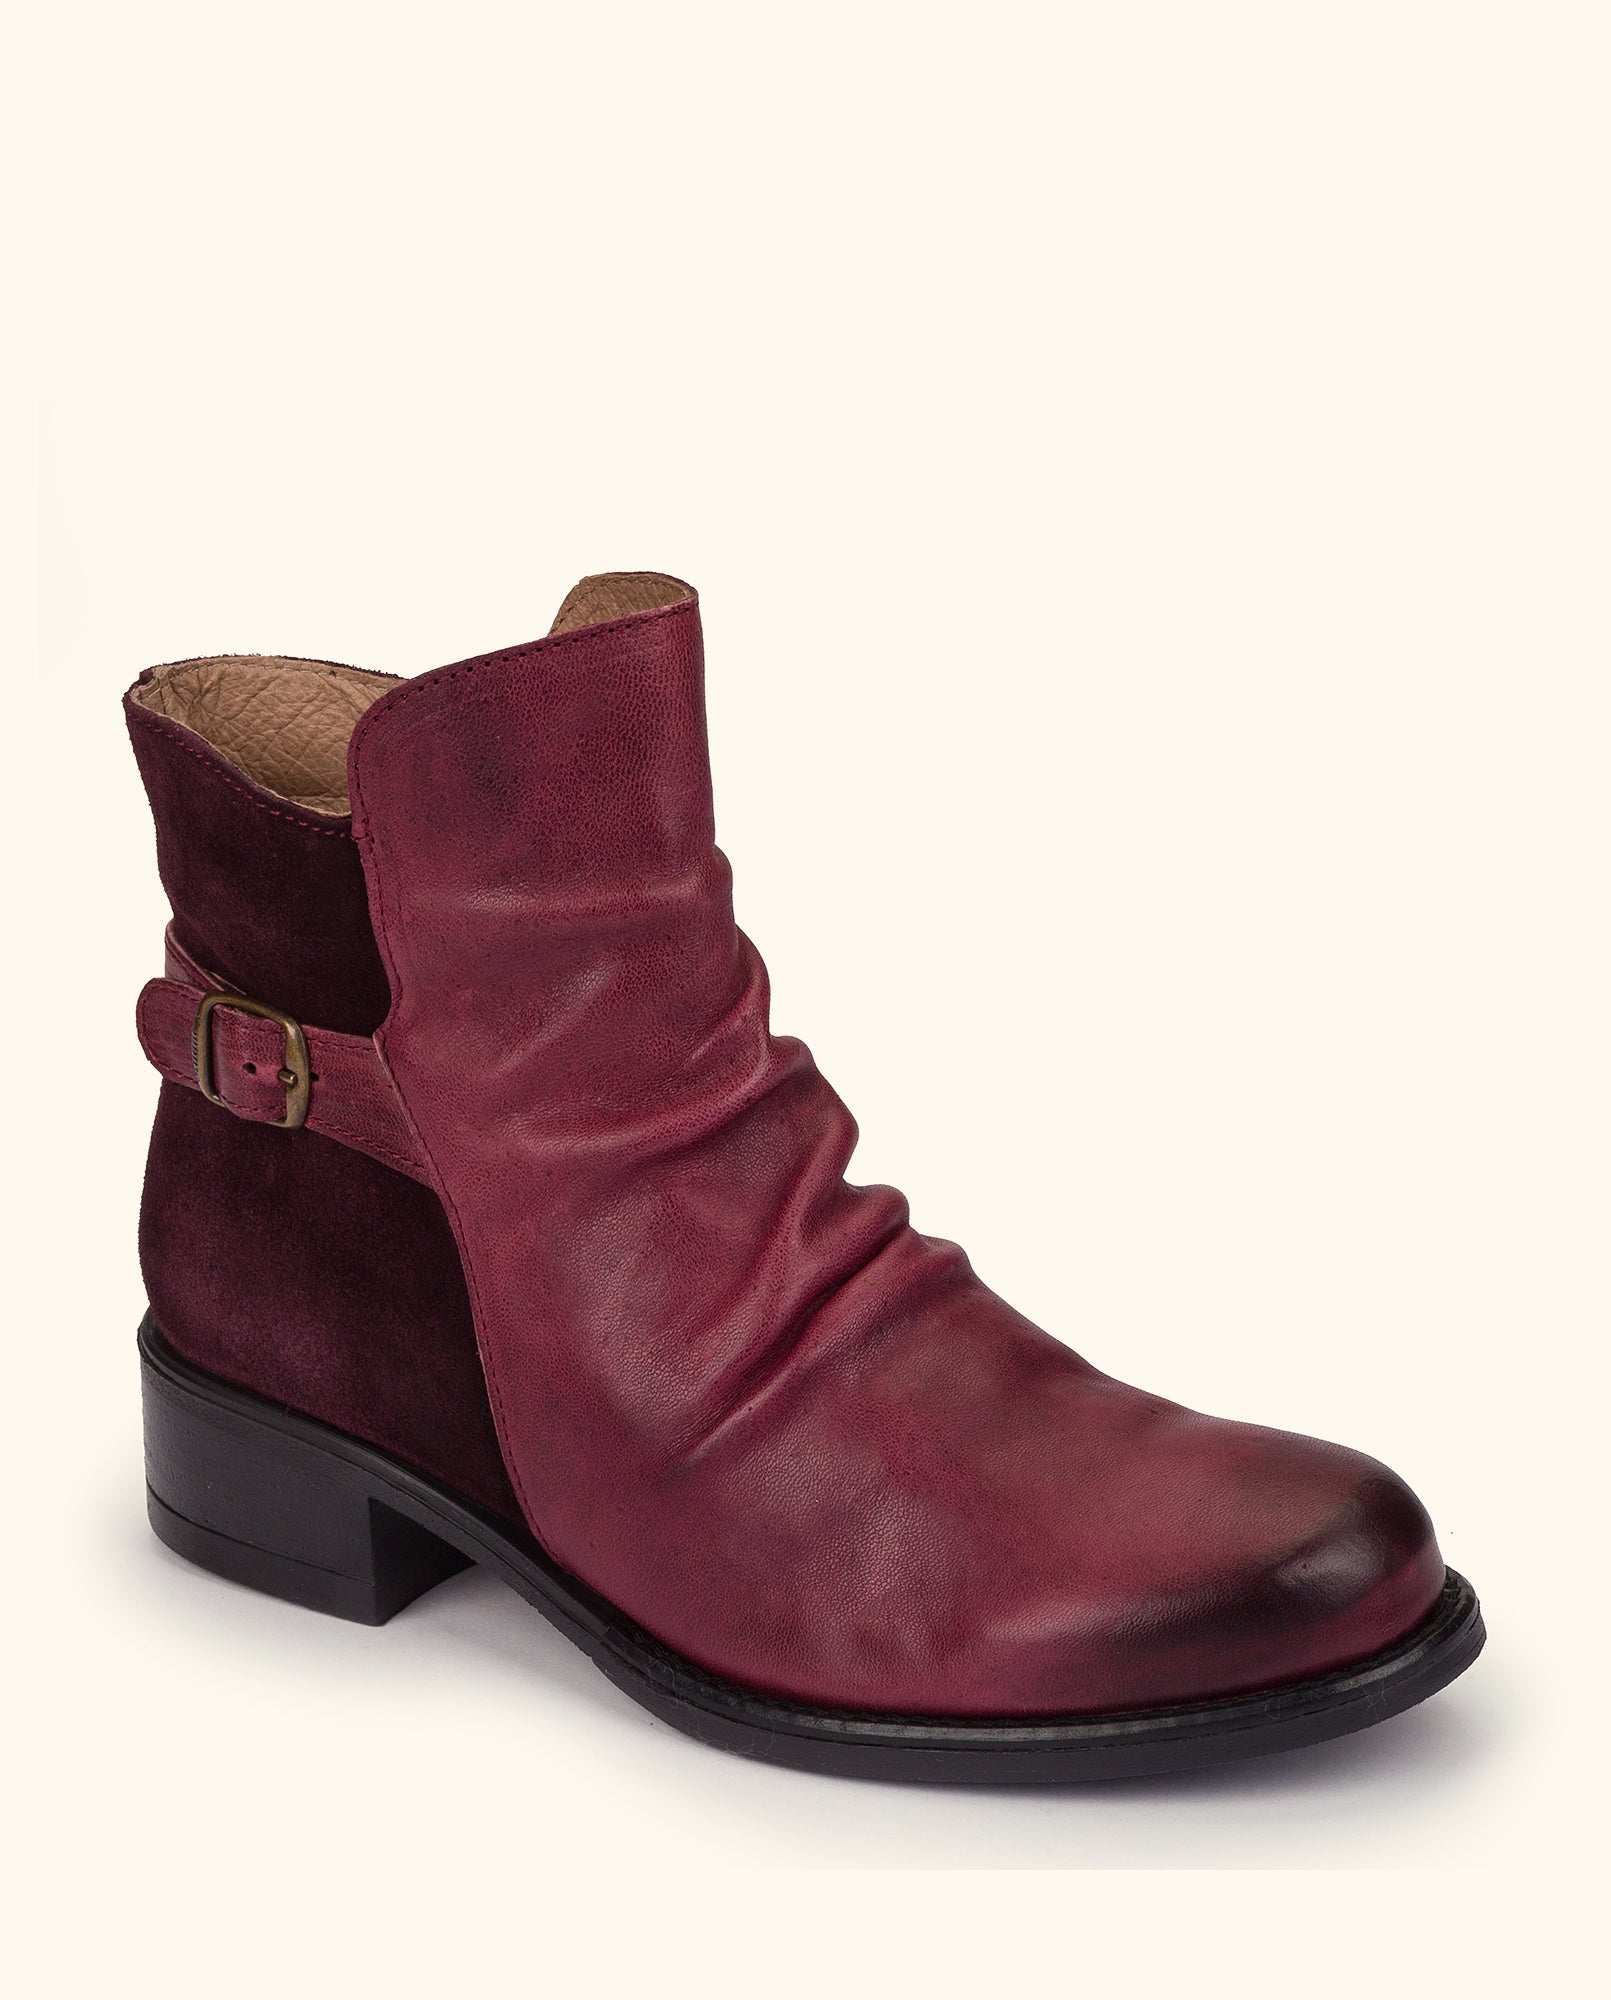 Flat ankle boot MONS-002 burgundy